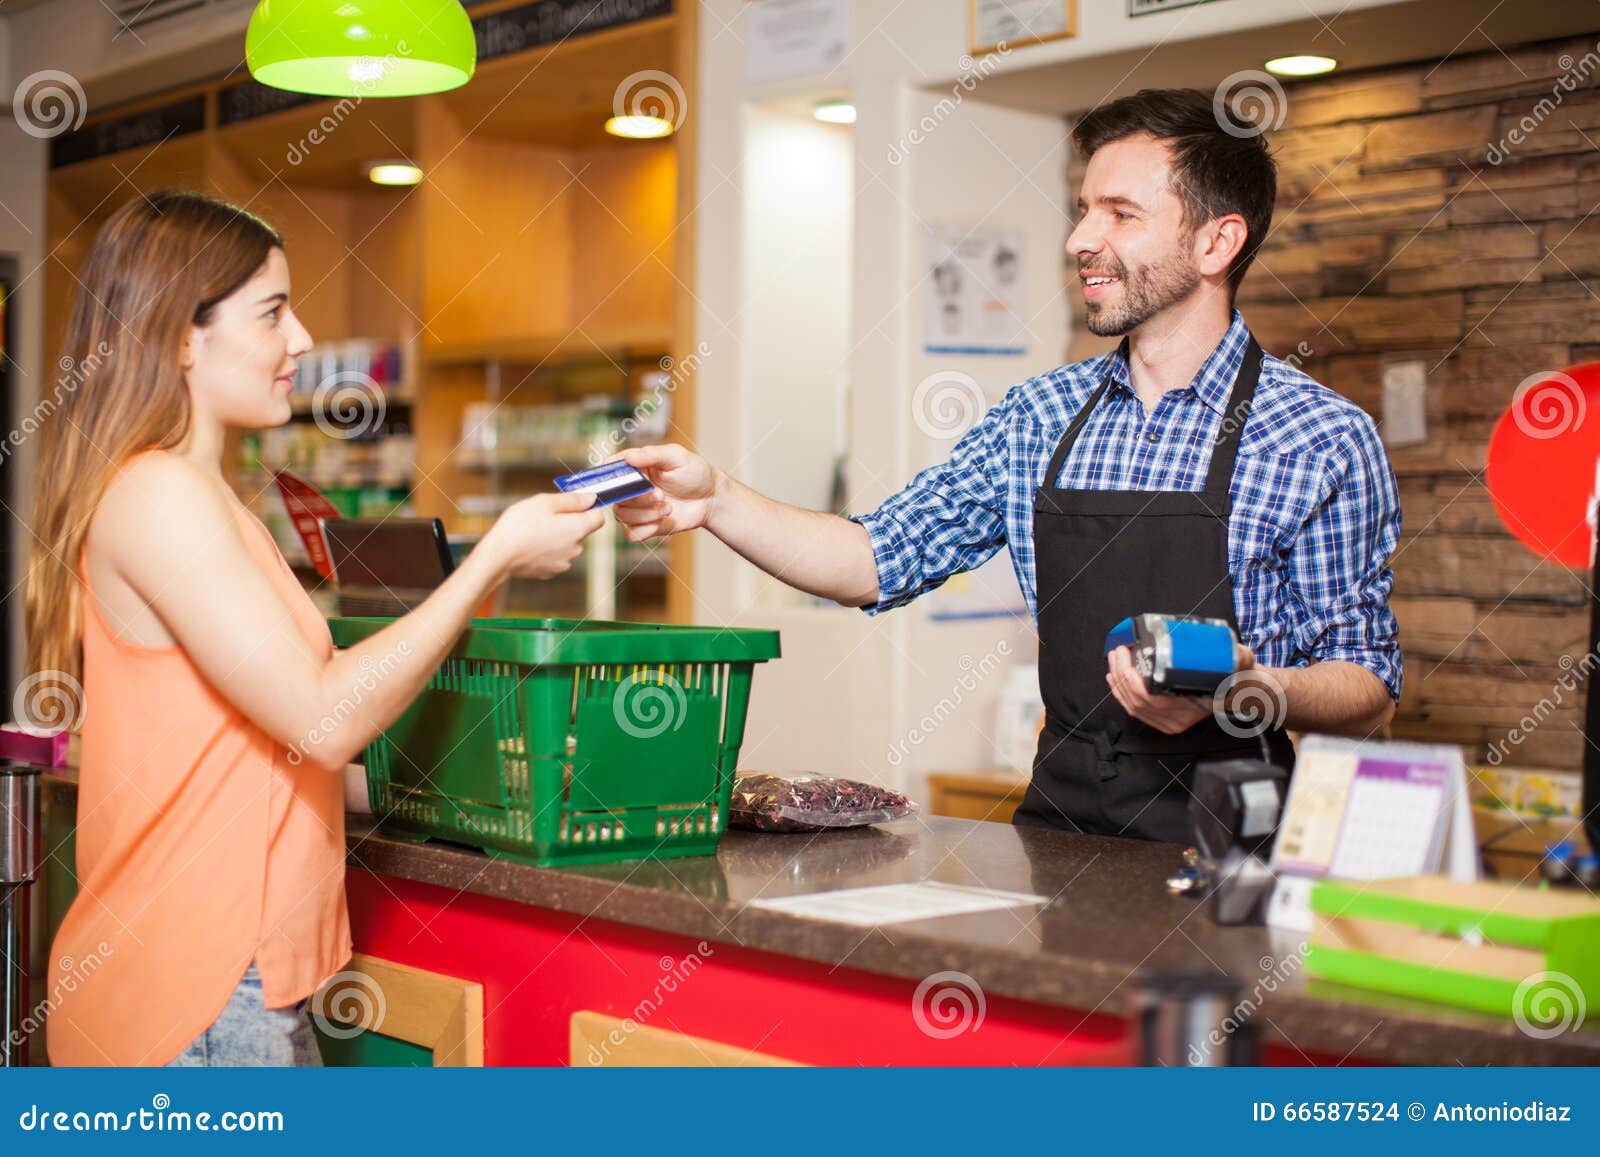 Paying with Credit Card at a Grocery Store Stock Photo - Image of